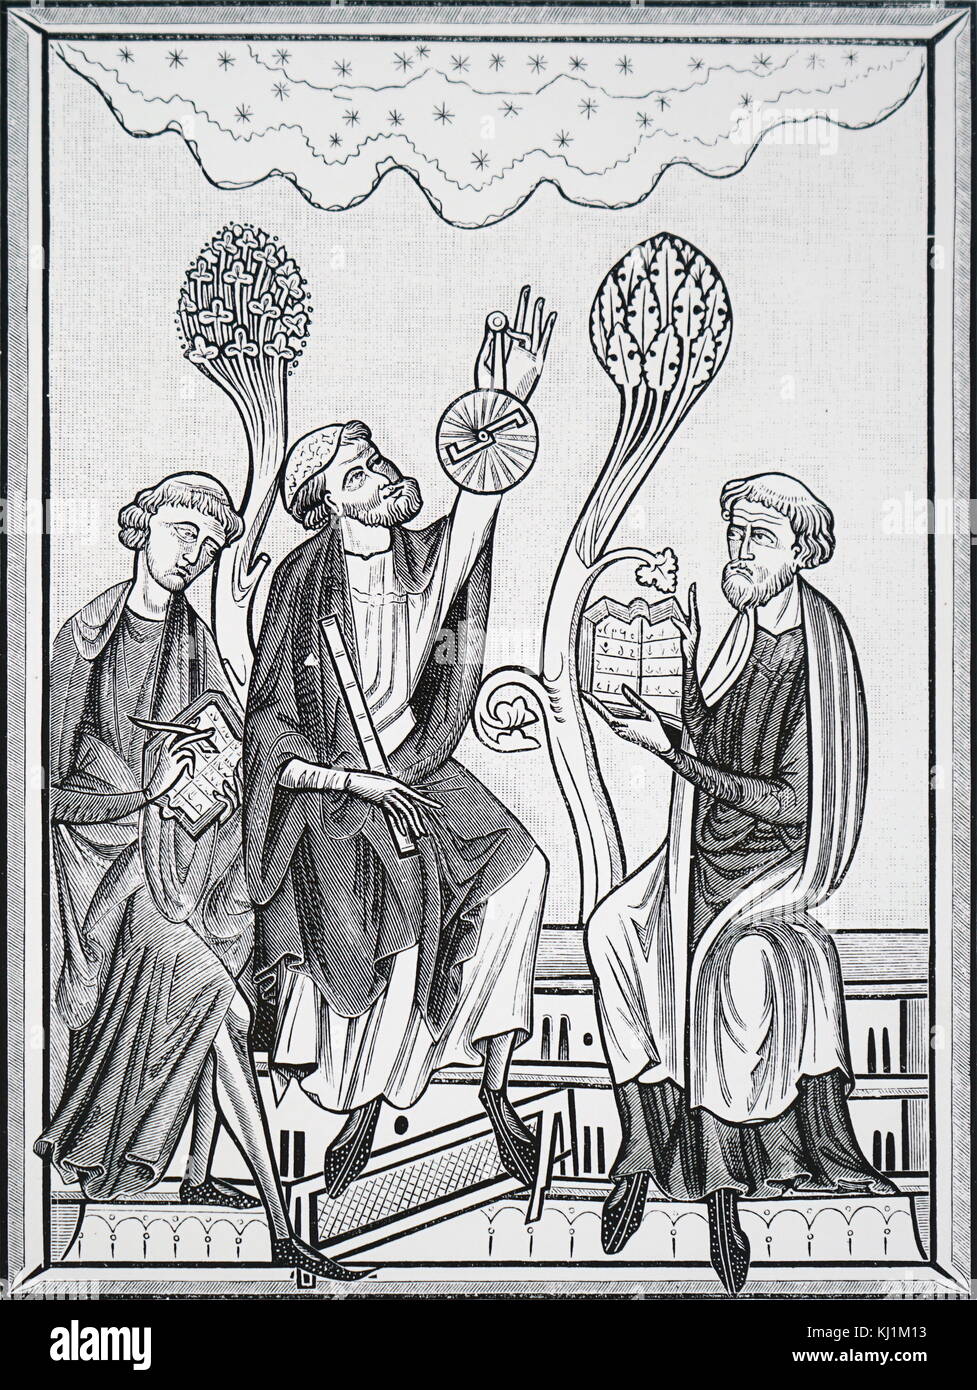 Engraving from a 13th century manuscript depicting an astronomy lesson. The central figure is shown using an astrolabe. Date 13th Century Stock Photo